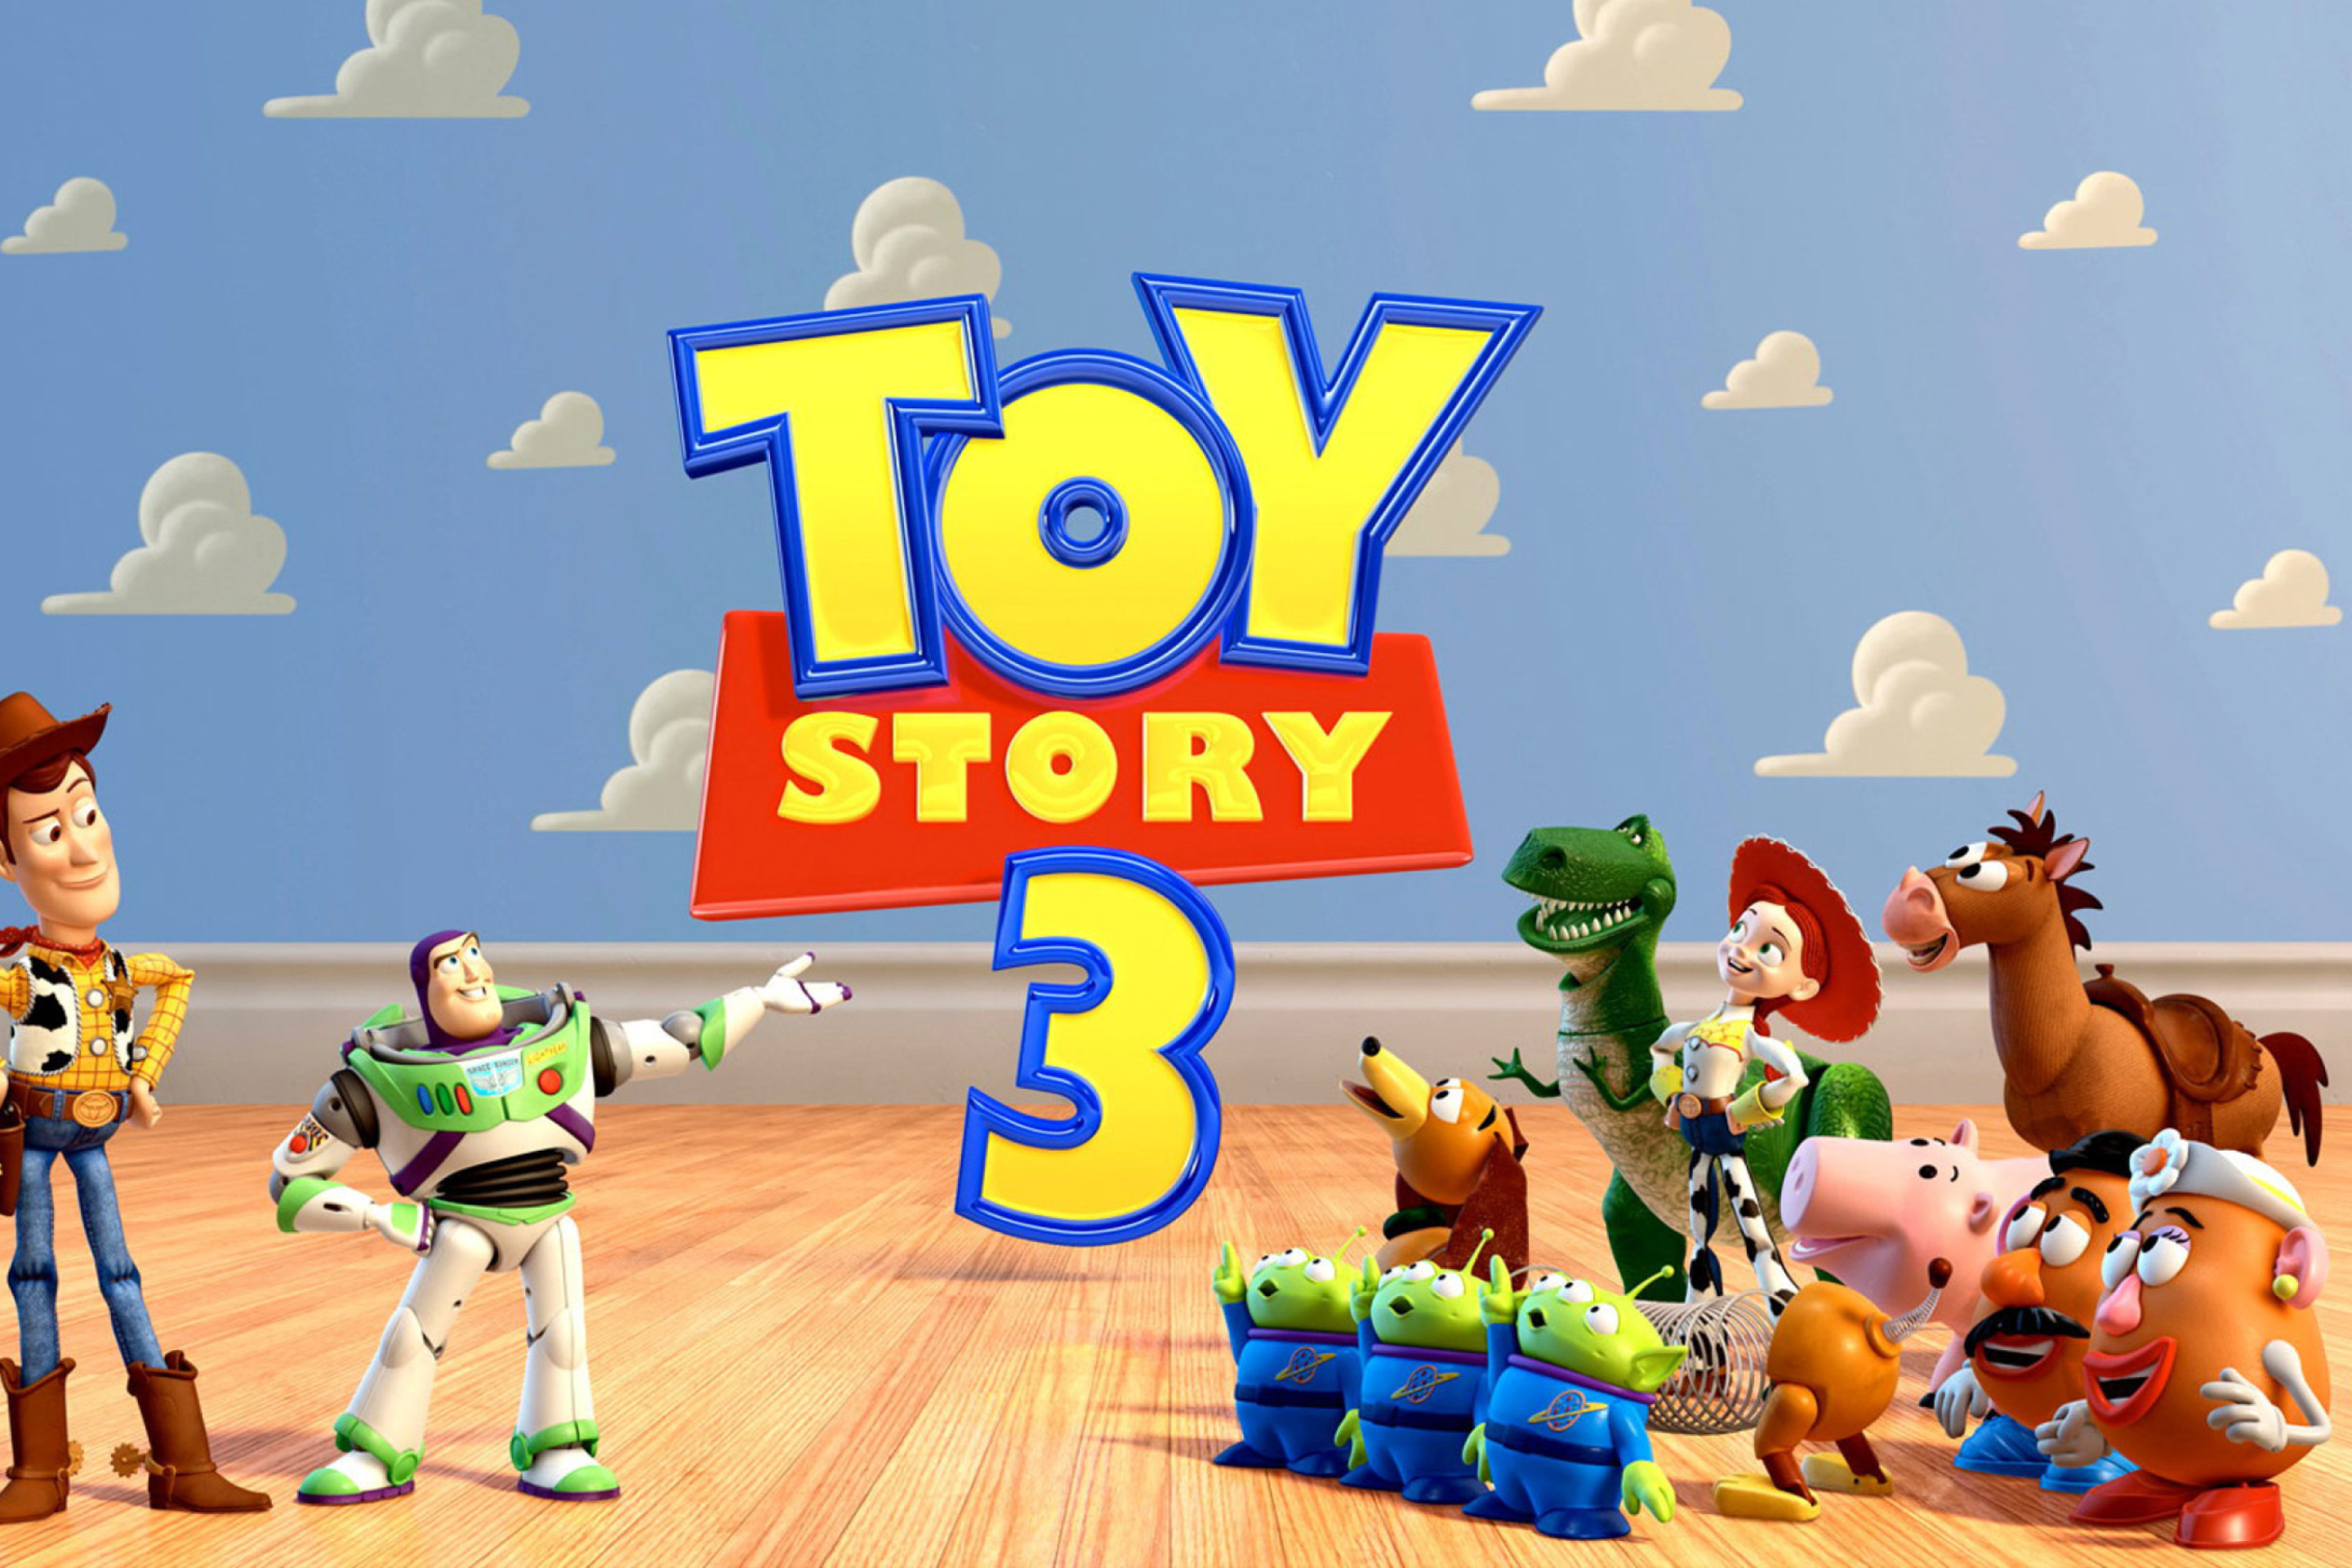 Toy Story 3 wallpaper 2880x1920